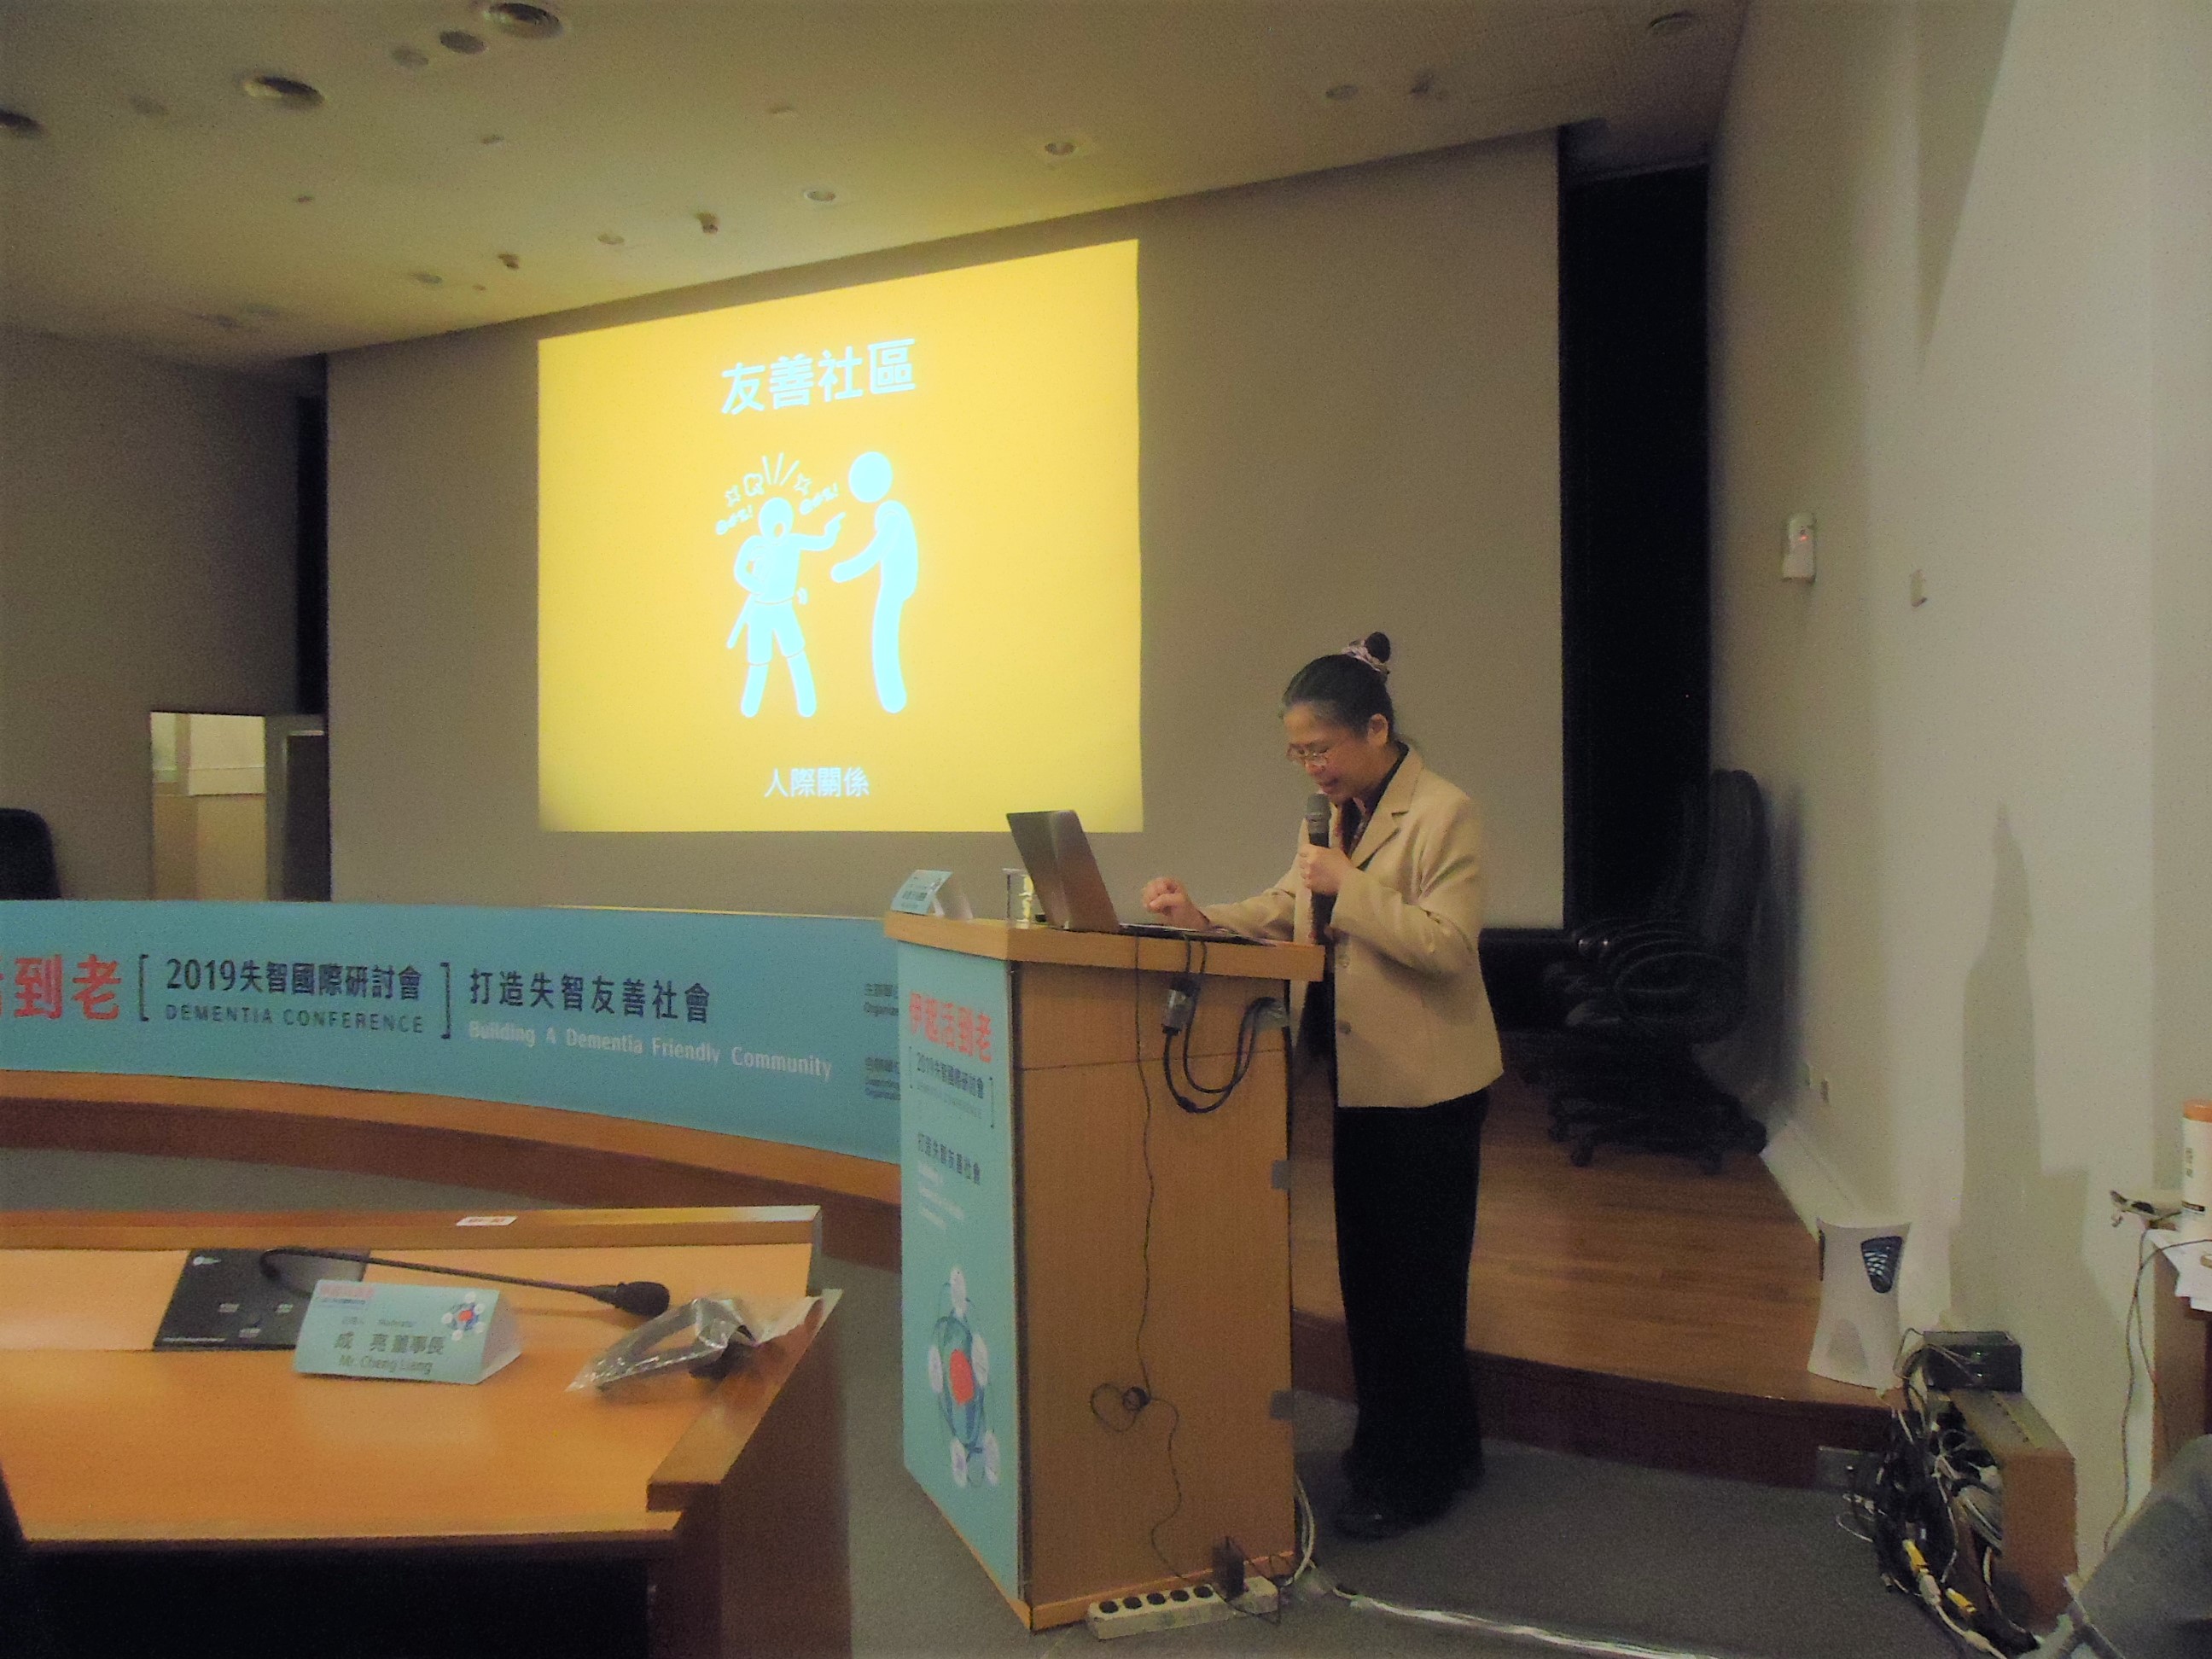 Ms. Tang was sharing her perspective toward Alzheimer’s Disease